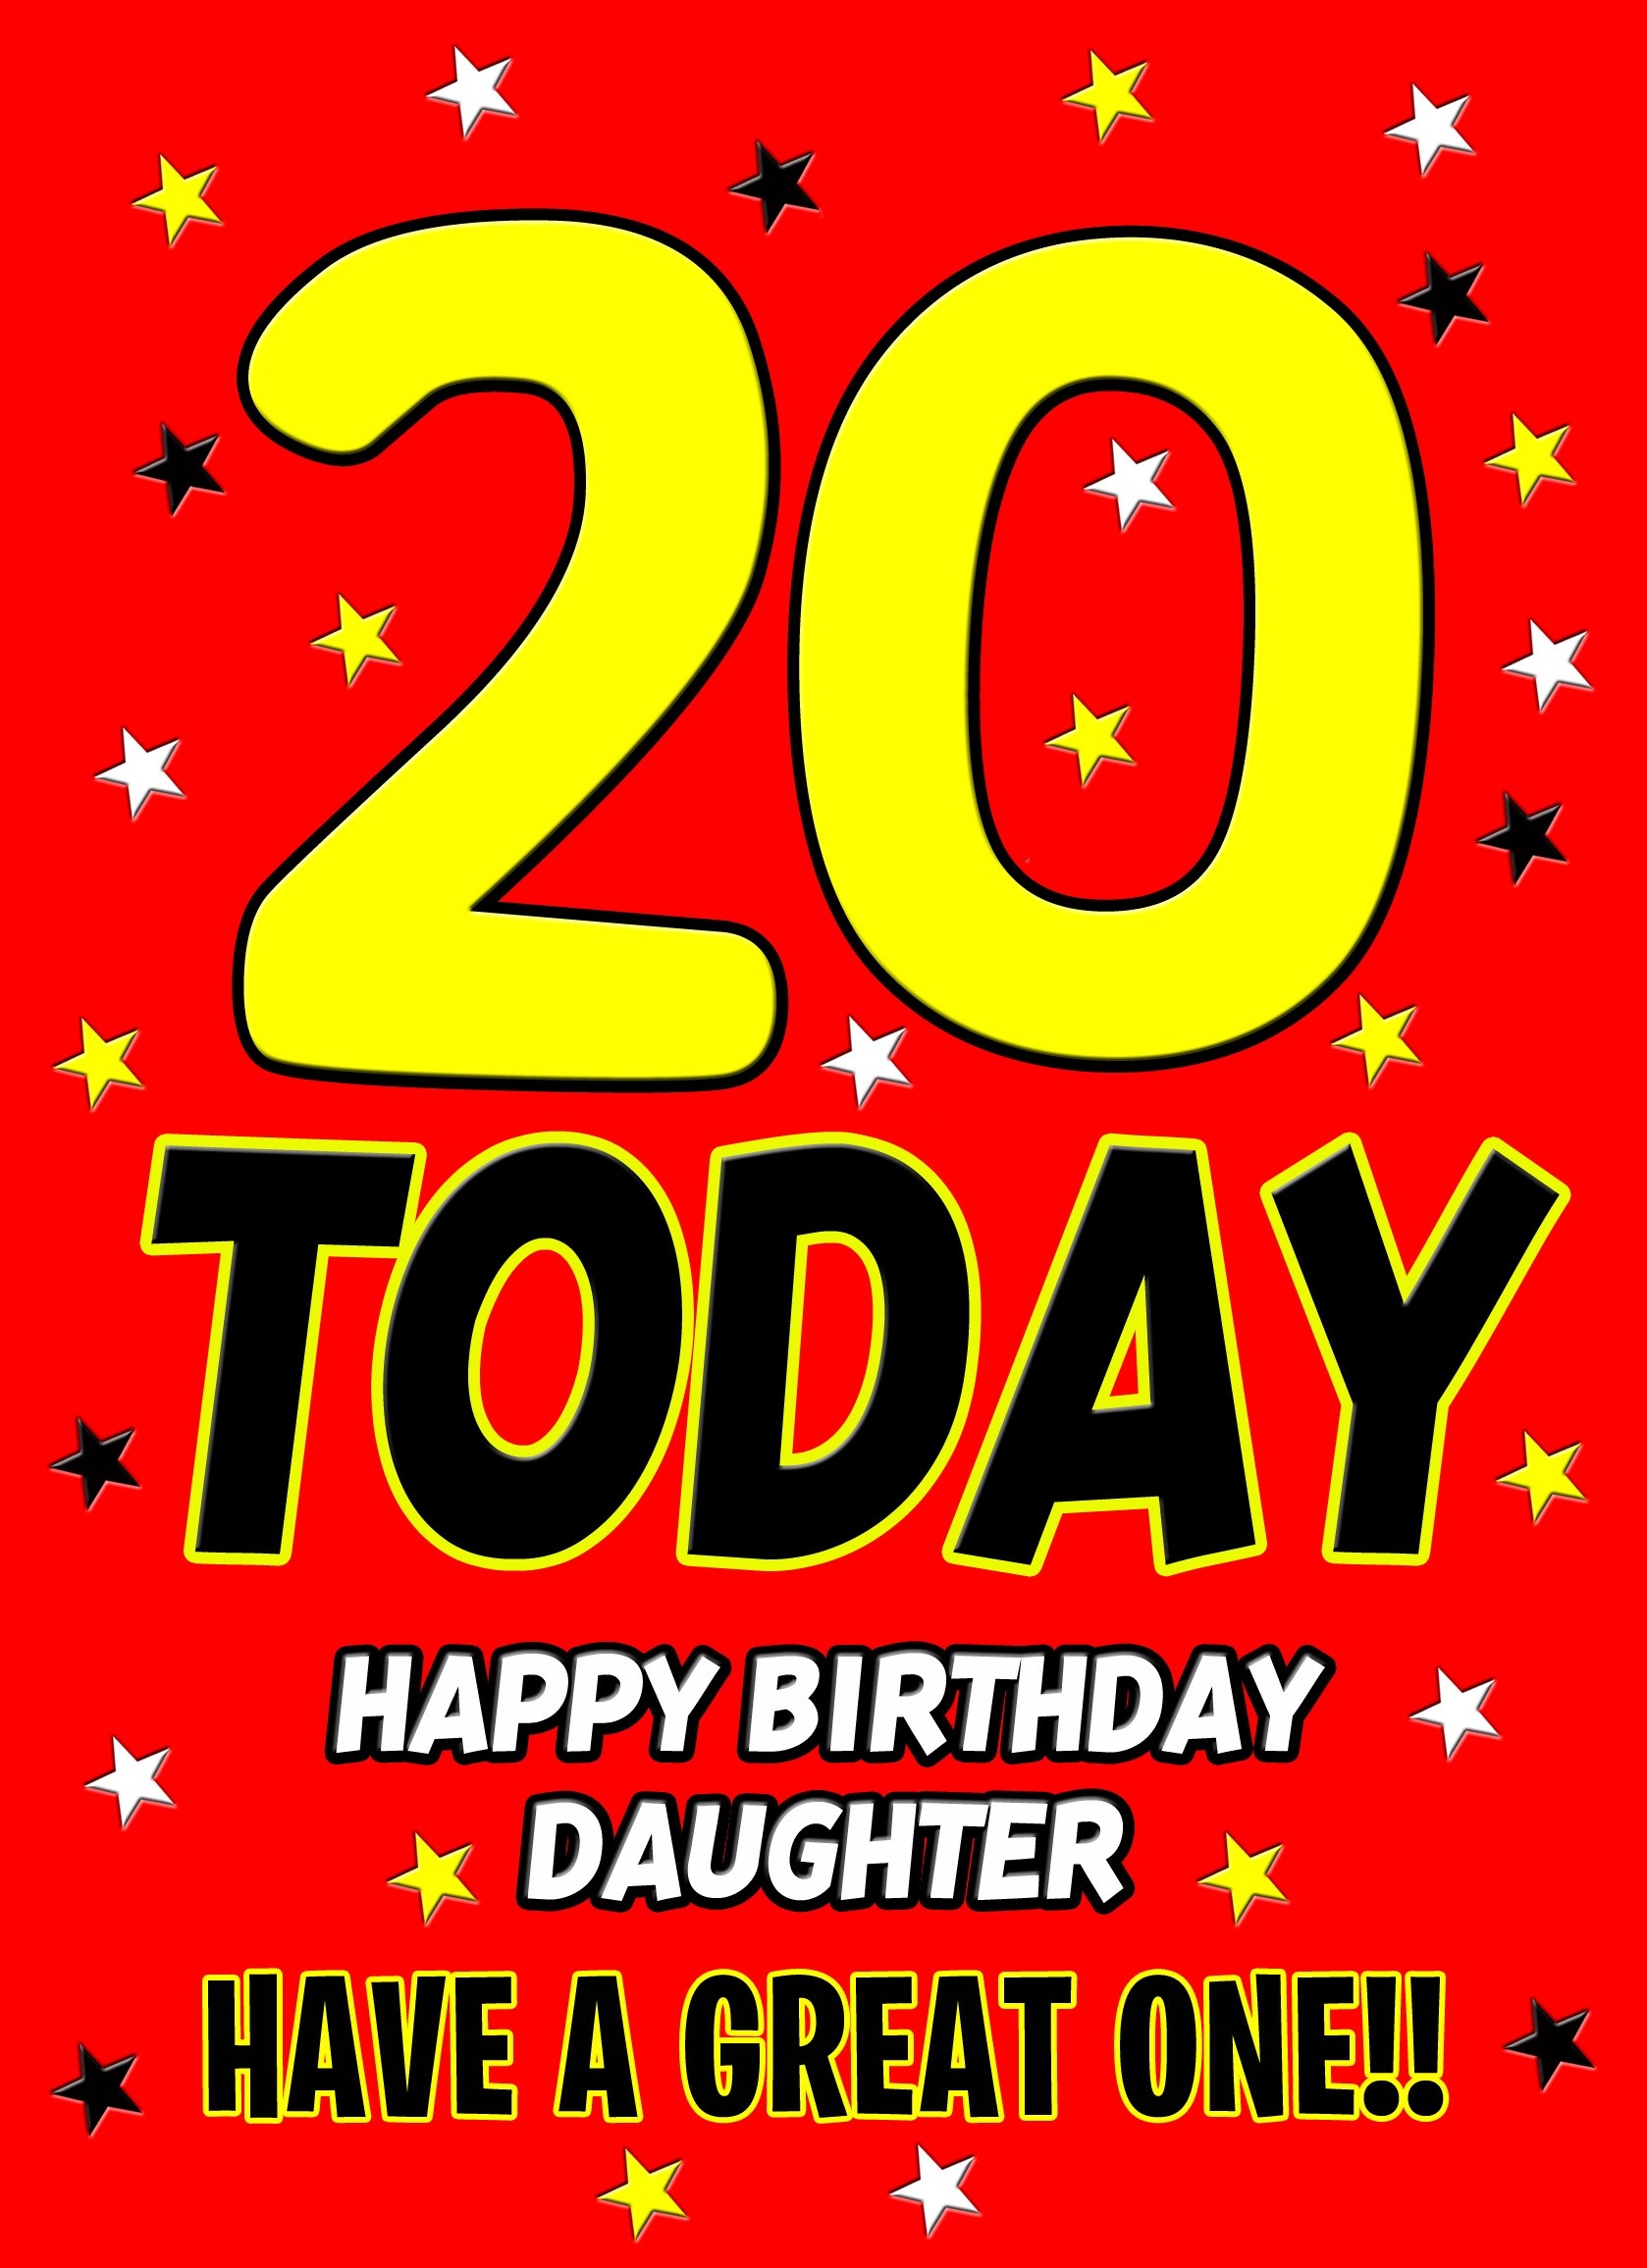 20 Today Birthday Card (Daughter)